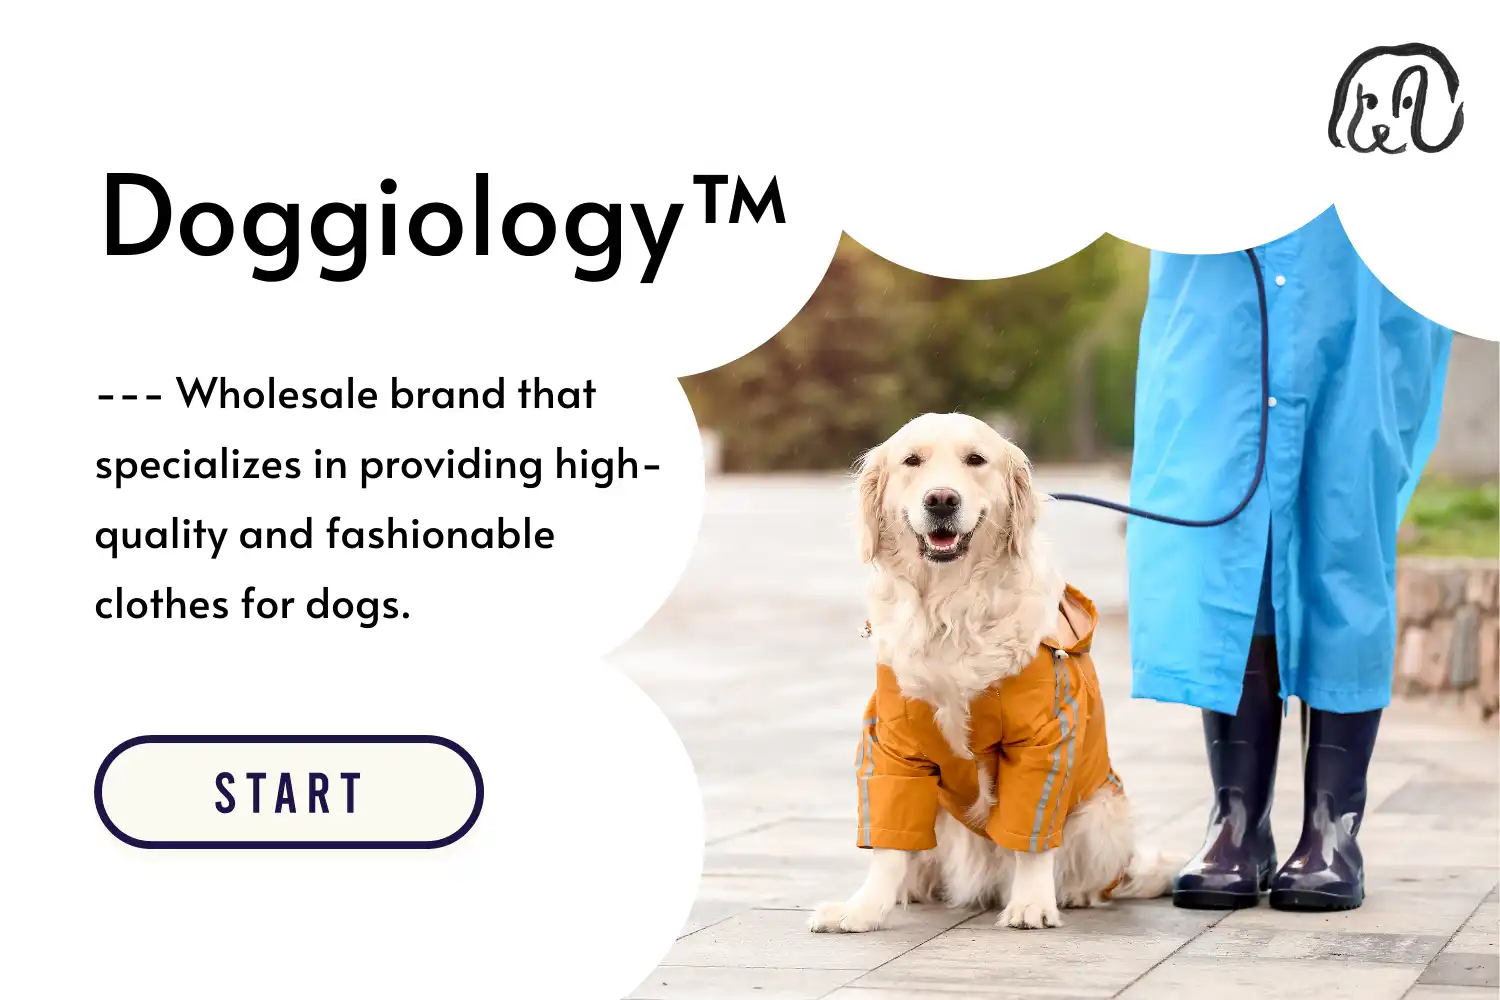 How to Start A Dog Clothing Business? - Find a Great Dog Clothes Manufacturer - Doggiology